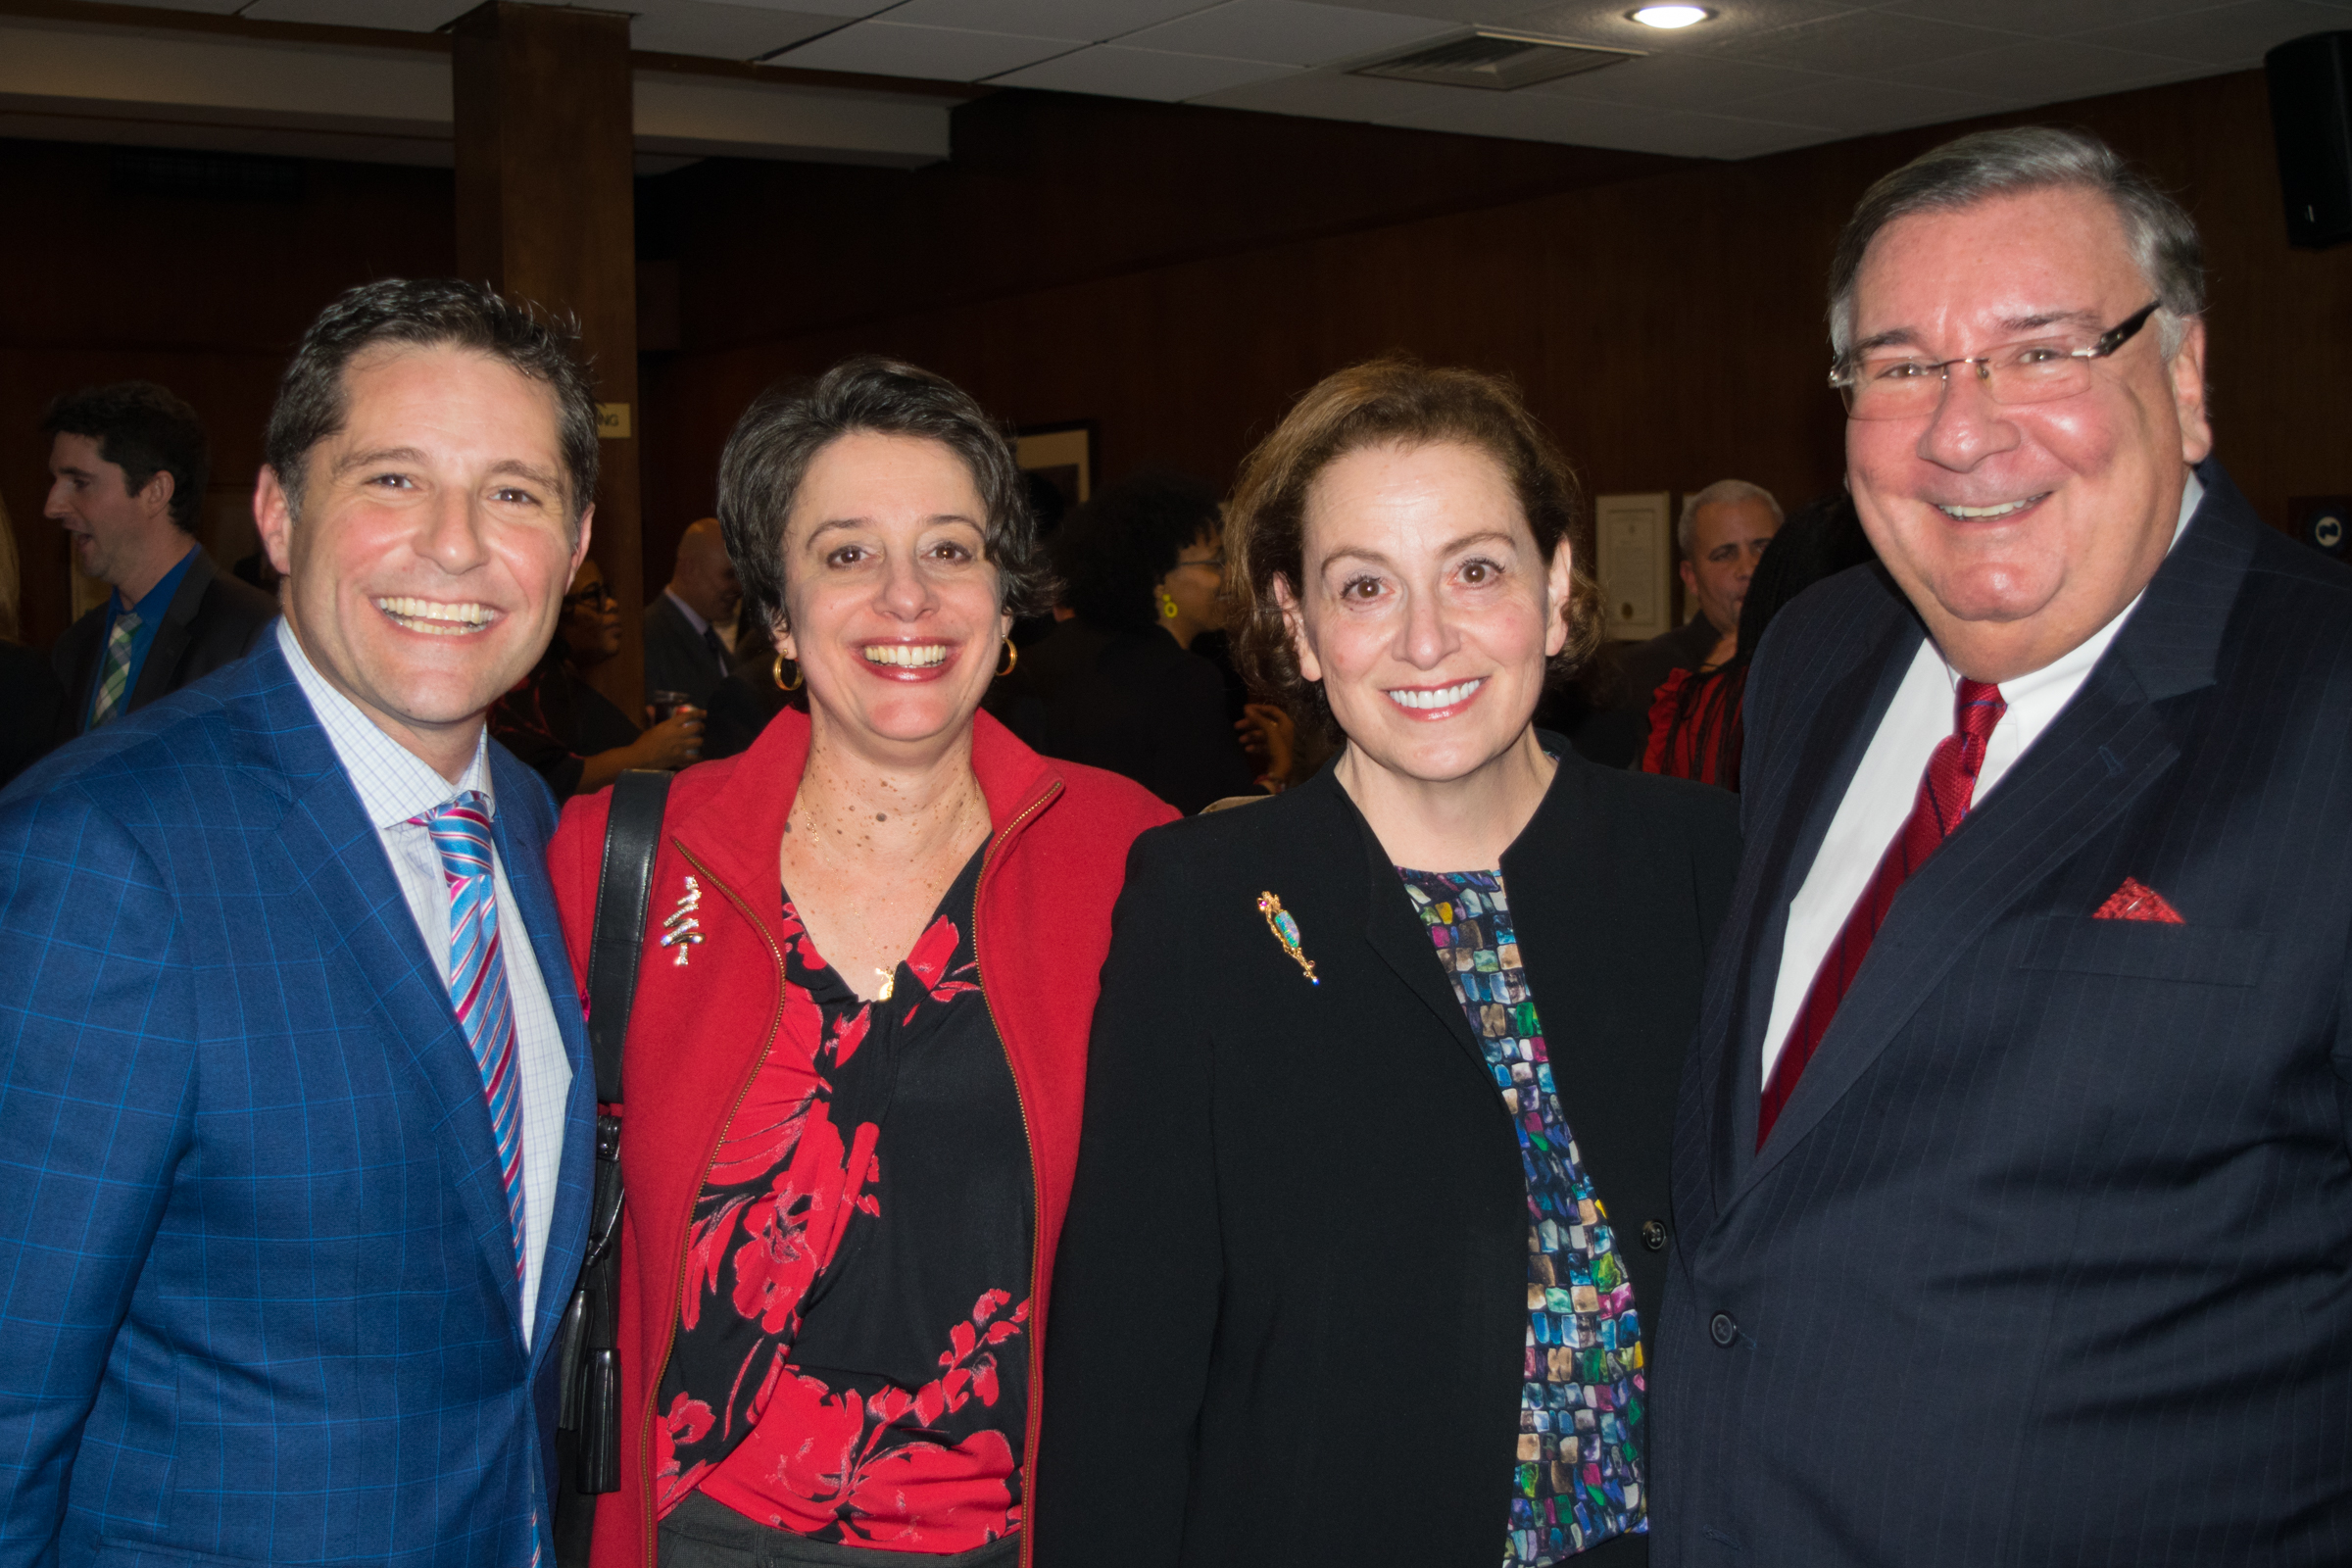 The Kings County Criminal Bar Association holiday party brings together the different factions of the criminal justice system. Pictured from left: President Michael Cibella, Hon. Dineen Riviezzo, Hon. Miriam Cyrulnik and Hon. Matthew D’Emic. Eagle photos by Rob Abruzzese